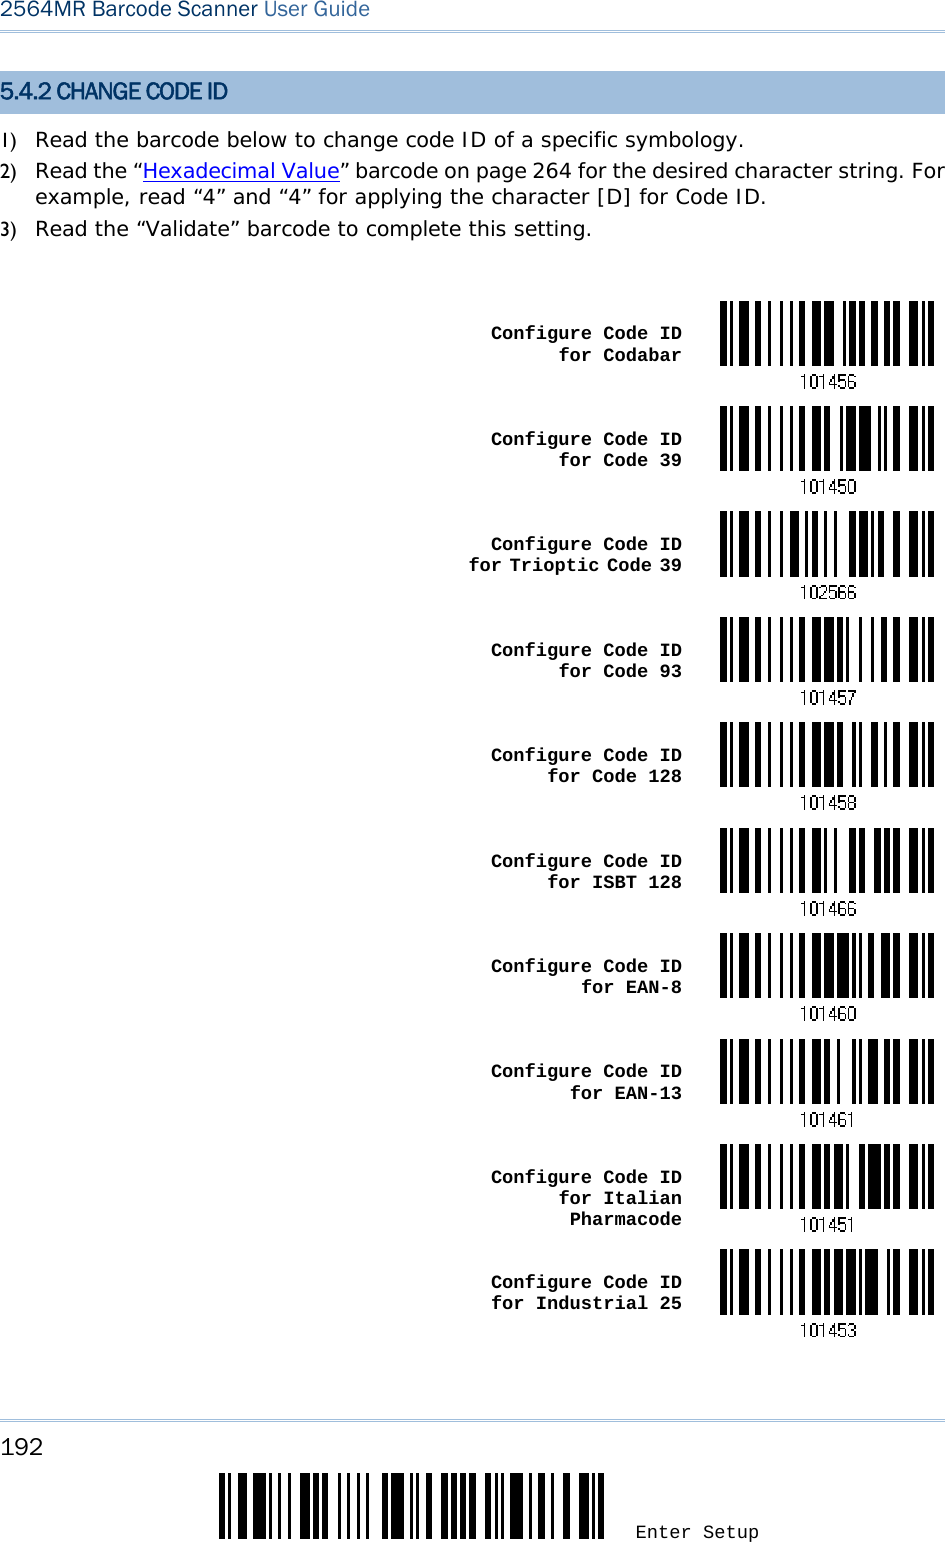 192 Enter Setup 2564MR Barcode Scanner User Guide  5.4.2 CHANGE CODE ID 1) Read the barcode below to change code ID of a specific symbology. 2) Read the “Hexadecimal Value” barcode on page 264 for the desired character string. For example, read “4” and “4” for applying the character [D] for Code ID. 3) Read the “Validate” barcode to complete this setting.   Configure Code ID for Codabar Configure Code ID for Code 39 Configure Code ID for Trioptic Code 39 Configure Code ID for Code 93 Configure Code ID for Code 128 Configure Code ID for ISBT 128 Configure Code ID for EAN-8 Configure Code ID for EAN-13 Configure Code ID for Italian Pharmacode Configure Code ID for Industrial 25 